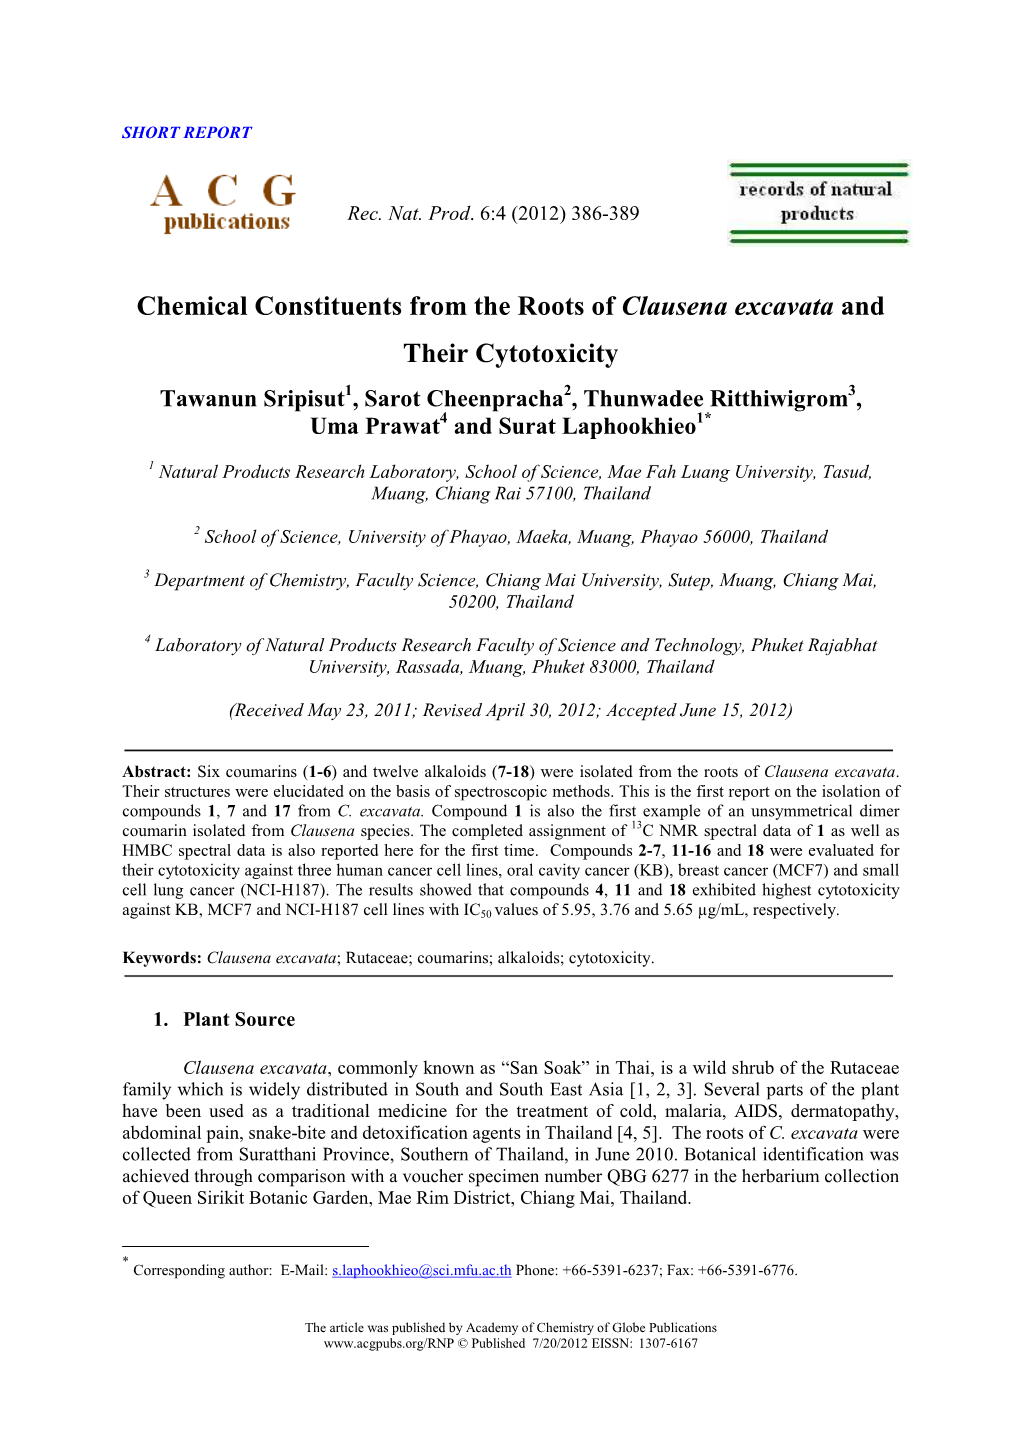 Chemical Constituents from the Roots of Clausena Excavata and Their